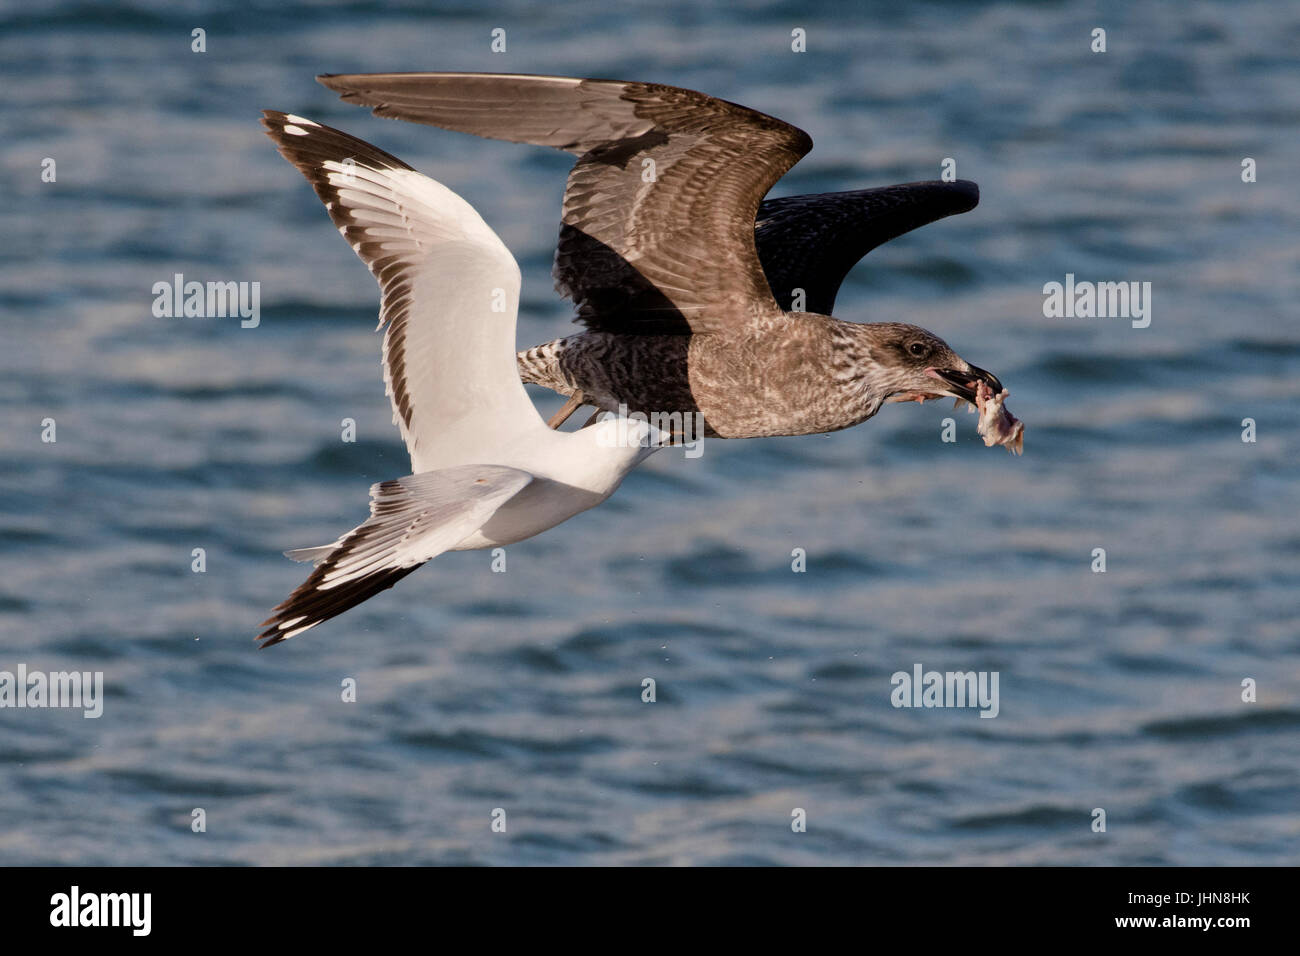 Pacific gull (Larus pacificus) being tackled in flight for its food by a silver gull (Chriococephalus novaehollandiae). Stock Photo